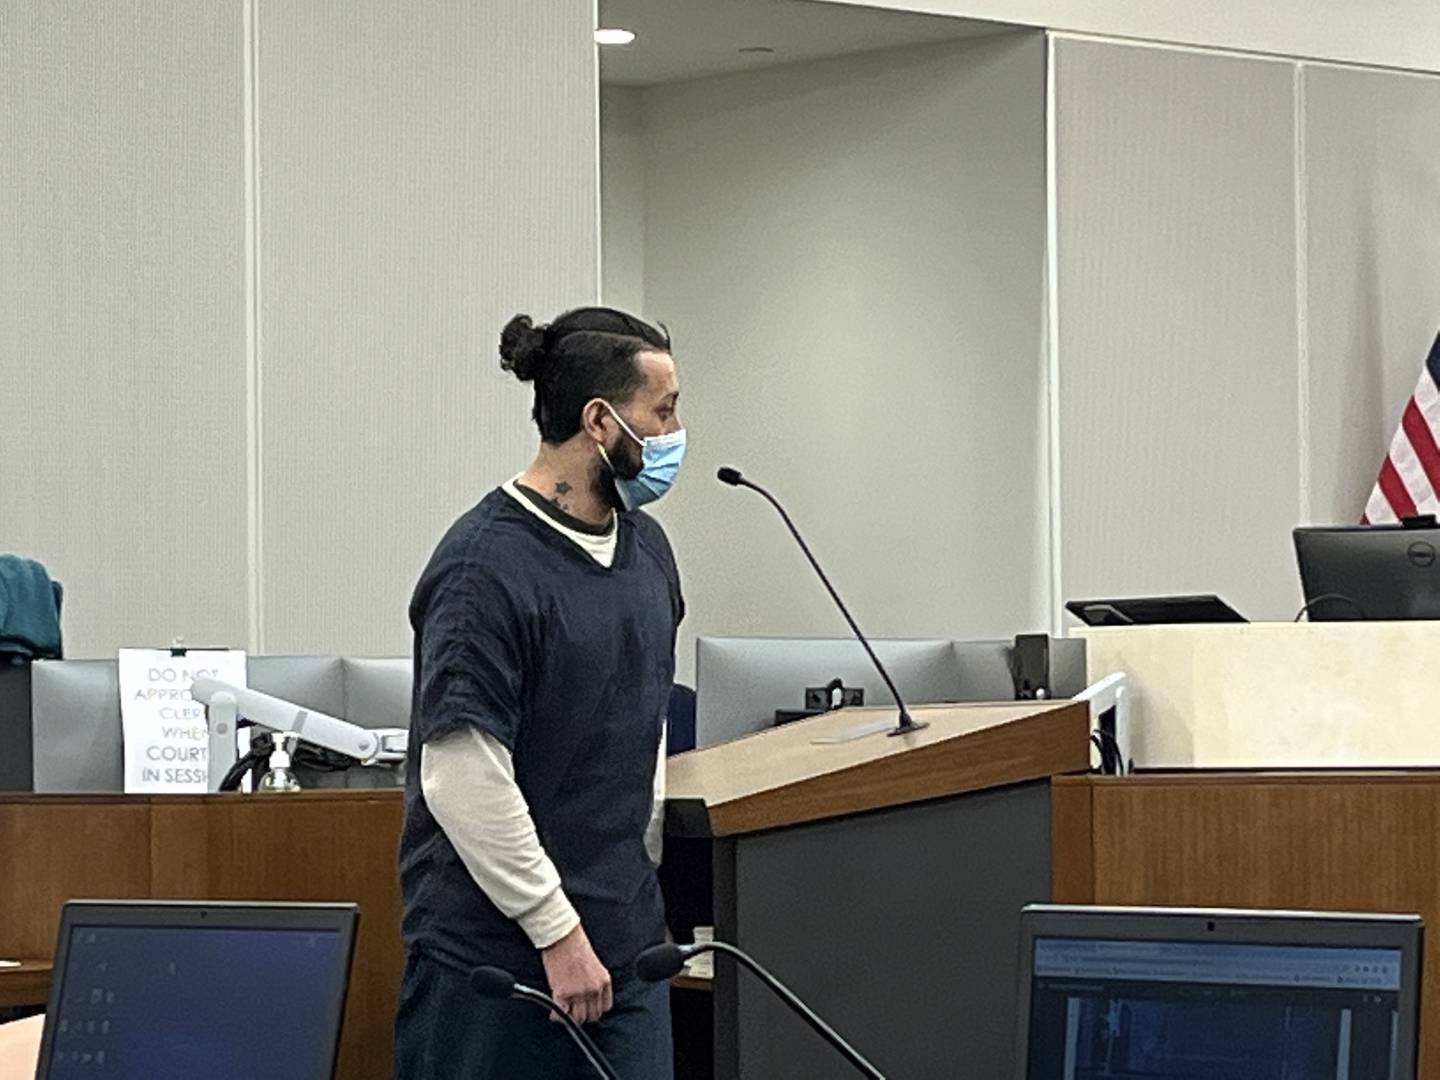 State witness Norberto Navarro enters the courtroom on Wednesday, March 23, 2022 to testify in the reckless homicide trial against Sean Woulfe.